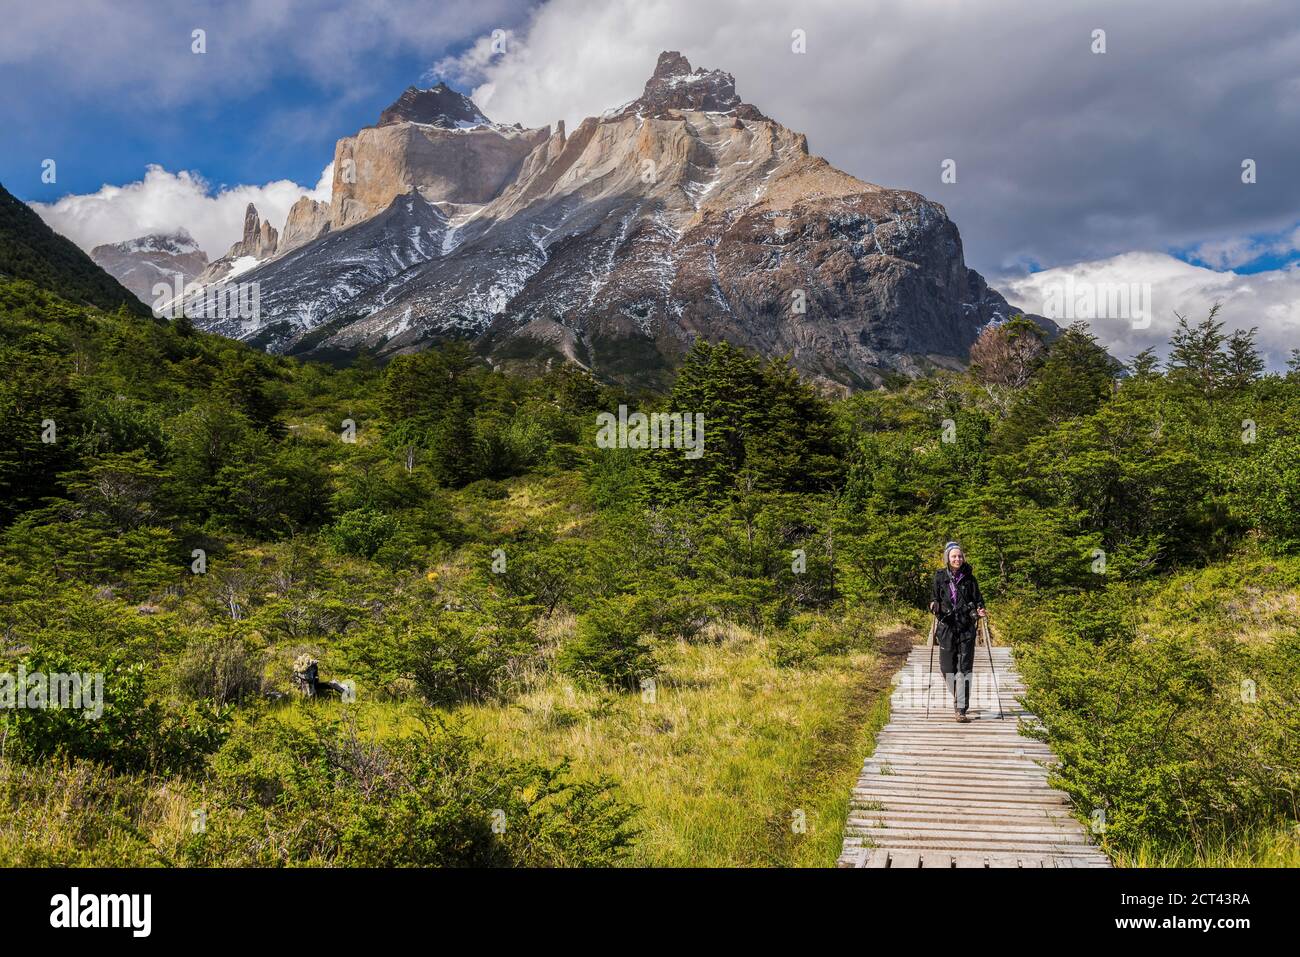 Woman hiking in Torres del Paine National Park with Los Cuernos and the Paine Massif behind, Patagonia, Chile, South America Stock Photo